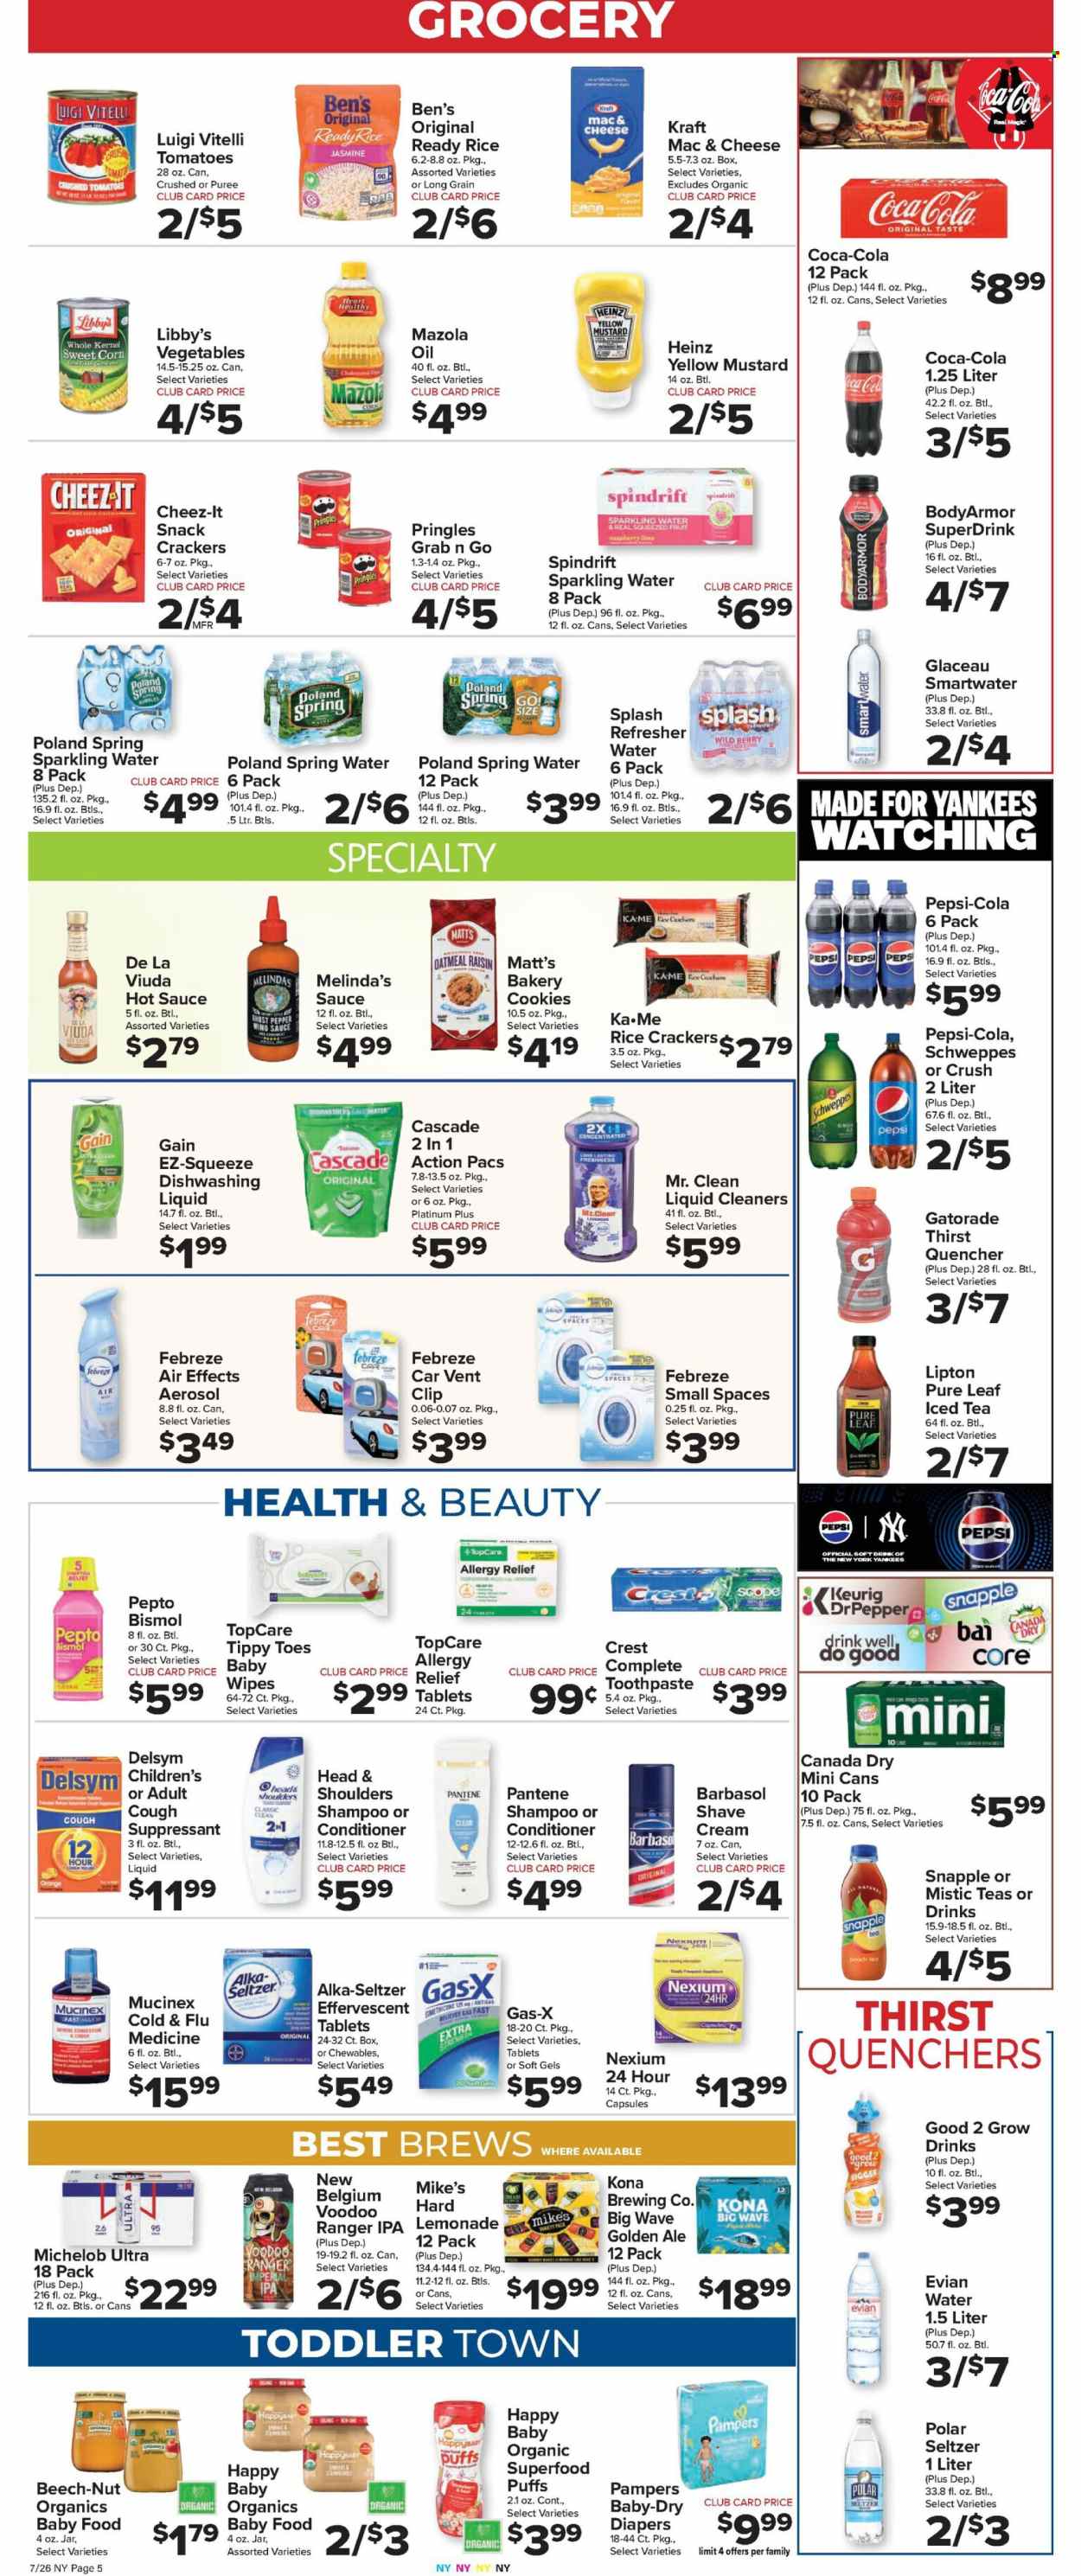 thumbnail - Foodtown Flyer - 07/26/2024 - 08/01/2024 - Sales products - puffs, tomatoes, sweet corn, mac and cheese, Kraft®, ready meal, rice sides, cookies, crackers, Pringles, chips, rice crackers, Cheez-It, salty snack, crushed tomatoes, Heinz, canned vegetables, Uncle Ben's, pepper, mustard, hot sauce, sauce, ghost pepper, wing sauce, Canada Dry, Coca-Cola, ginger ale, lemonade, Schweppes, Pepsi, Lipton, ice tea, soft drink, Snapple, Spindrift, Gatorade, electrolyte drink, antioxidant drink, spring water, sparkling water, bottled water, Smartwater, Evian, water, carbonated soft drink, Pure Leaf, Keurig, beer, IPA, organic baby food, wipes, Pampers, nappies, Febreze, Gain, cleaner, Cascade, dishwashing liquid, dishwasher tablets, shampoo, toothpaste, Crest, conditioner, refresher, Head & Shoulders, Pantene, Barbasol, shave cream, air freshener, Delsym, Cold & Flu, Mucinex, Pepto-bismol, Nexium, Alka-seltzer, Go!, allergy relief, medicine, acid blocker, allergy control, antinauseant product, Michelob. Page 7.